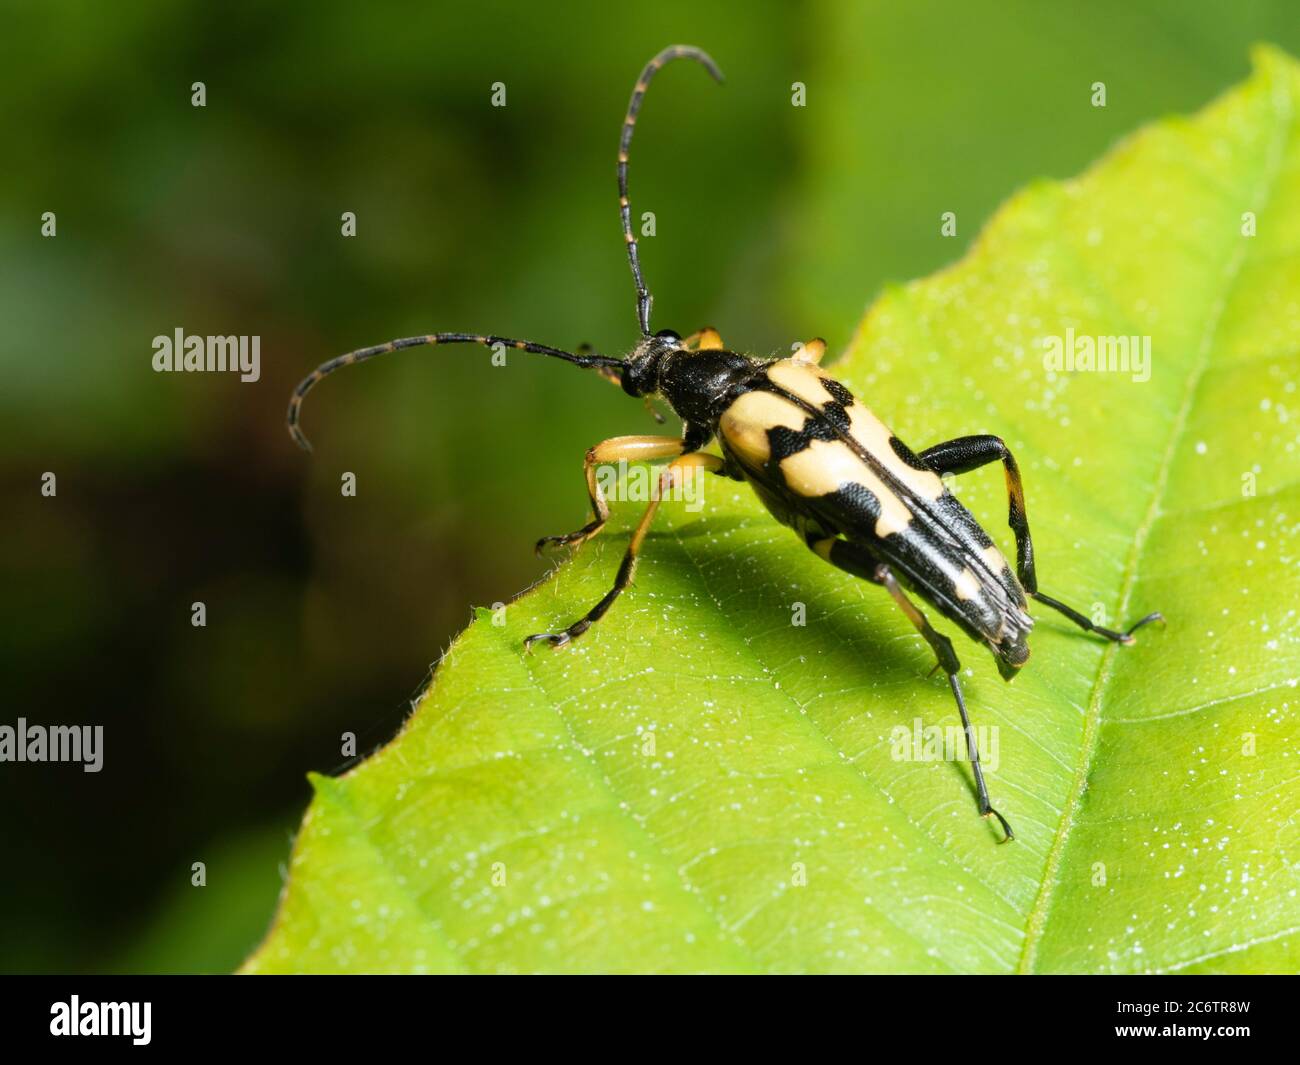 Yellow and black marked body of the woodland margin and hedgerow UK spotted longnorn beetle, Rutpela maculata Stock Photo